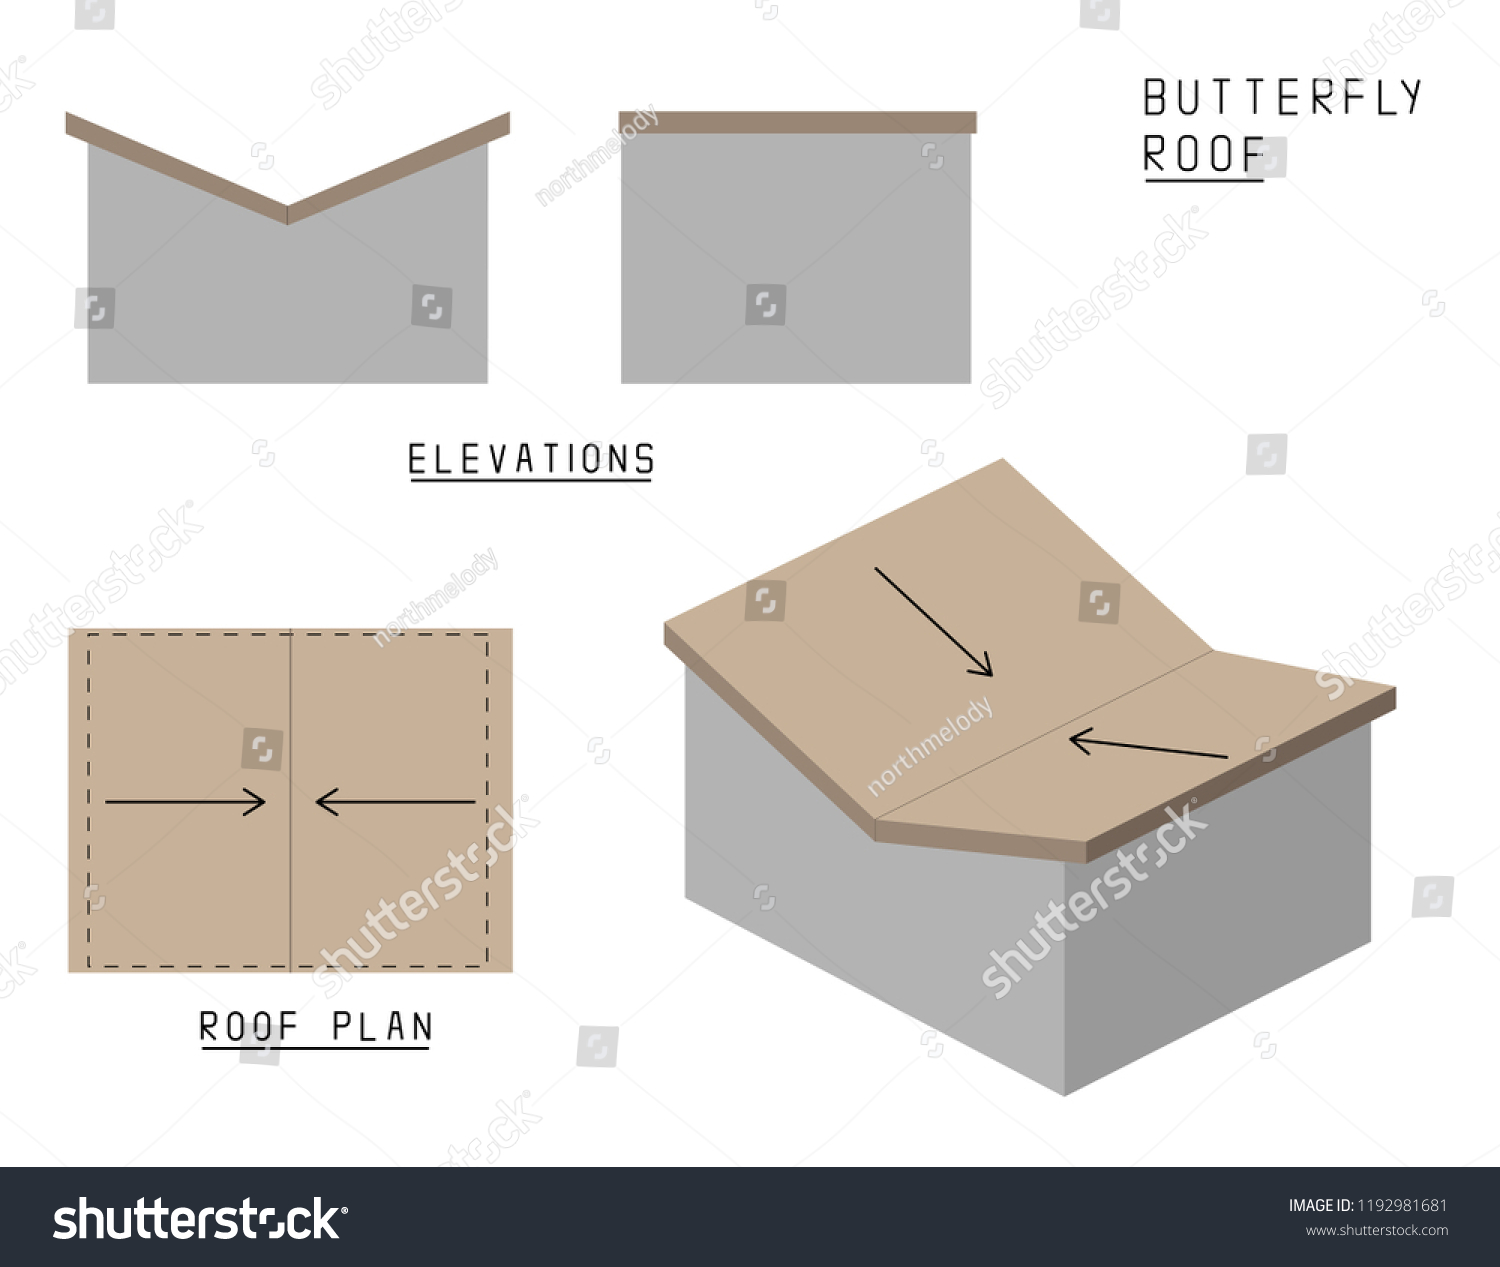 Download Vector Butterfly Roof House Elevations Roof Stock Vector ...